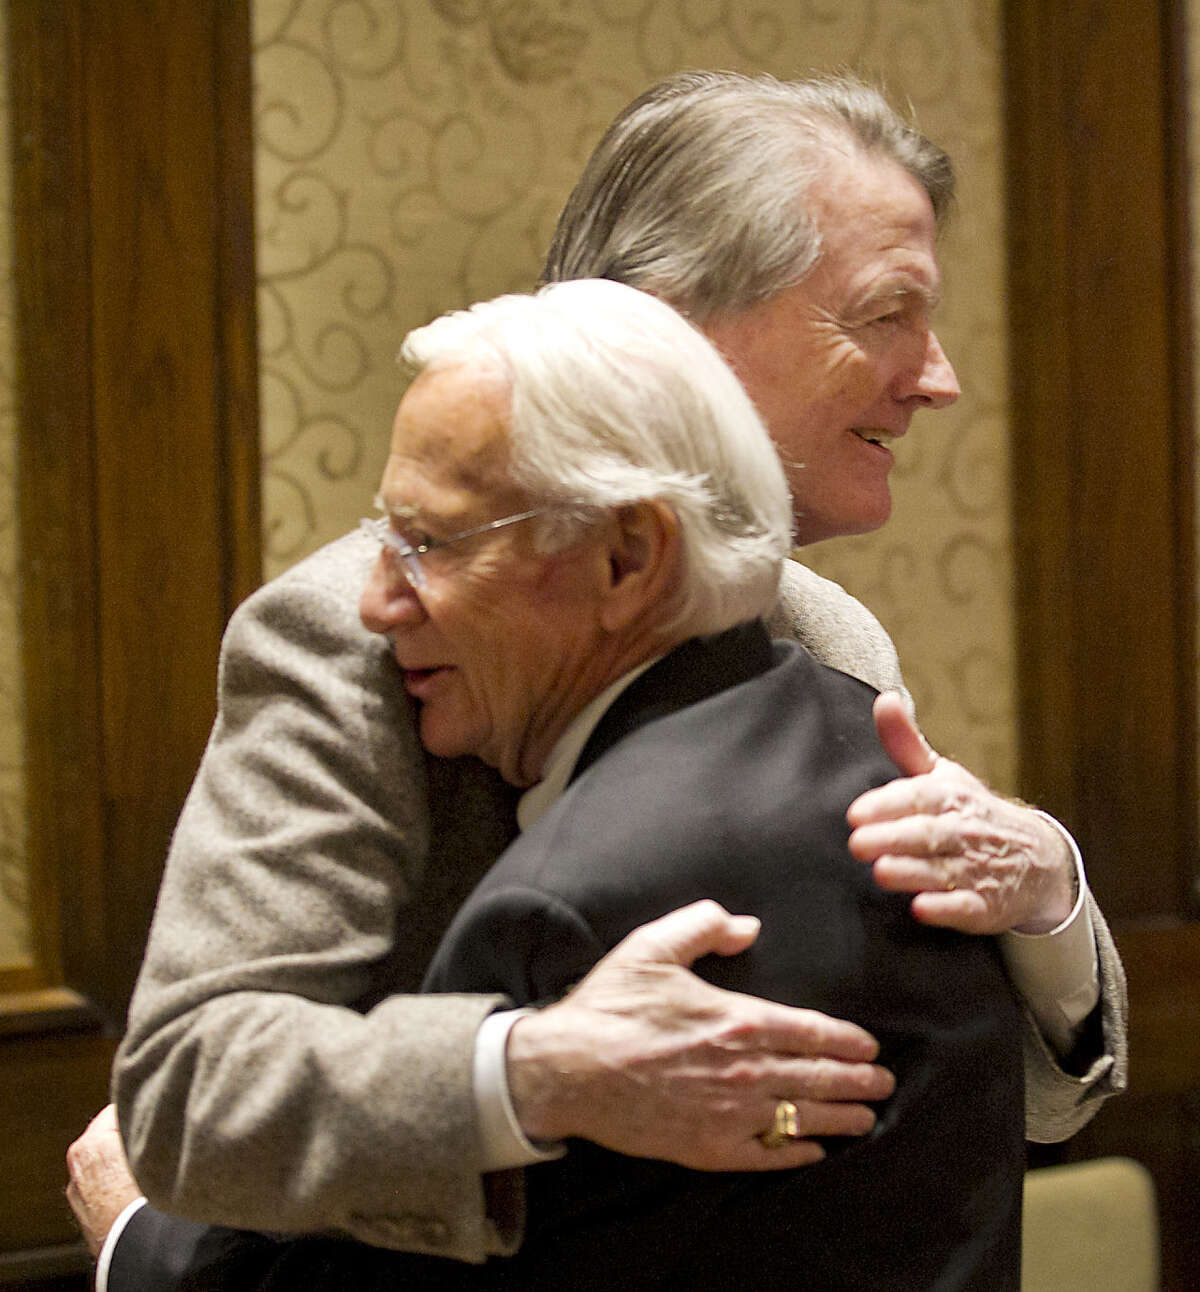 University of Texas at Austin President Bill Powers, right, hugs Regent Robert L. Stillwell as he attends the UT System Board of Regents meeting Thursday morning December 12, 2013. Powers was to discuss a specific agenda item but after the morning business the regents recessed to move into Executive Session. A possible decision on whether Powers will remain as President could be discussed in that session. RALPH BARRERA / AMERICAN-STATESMAN